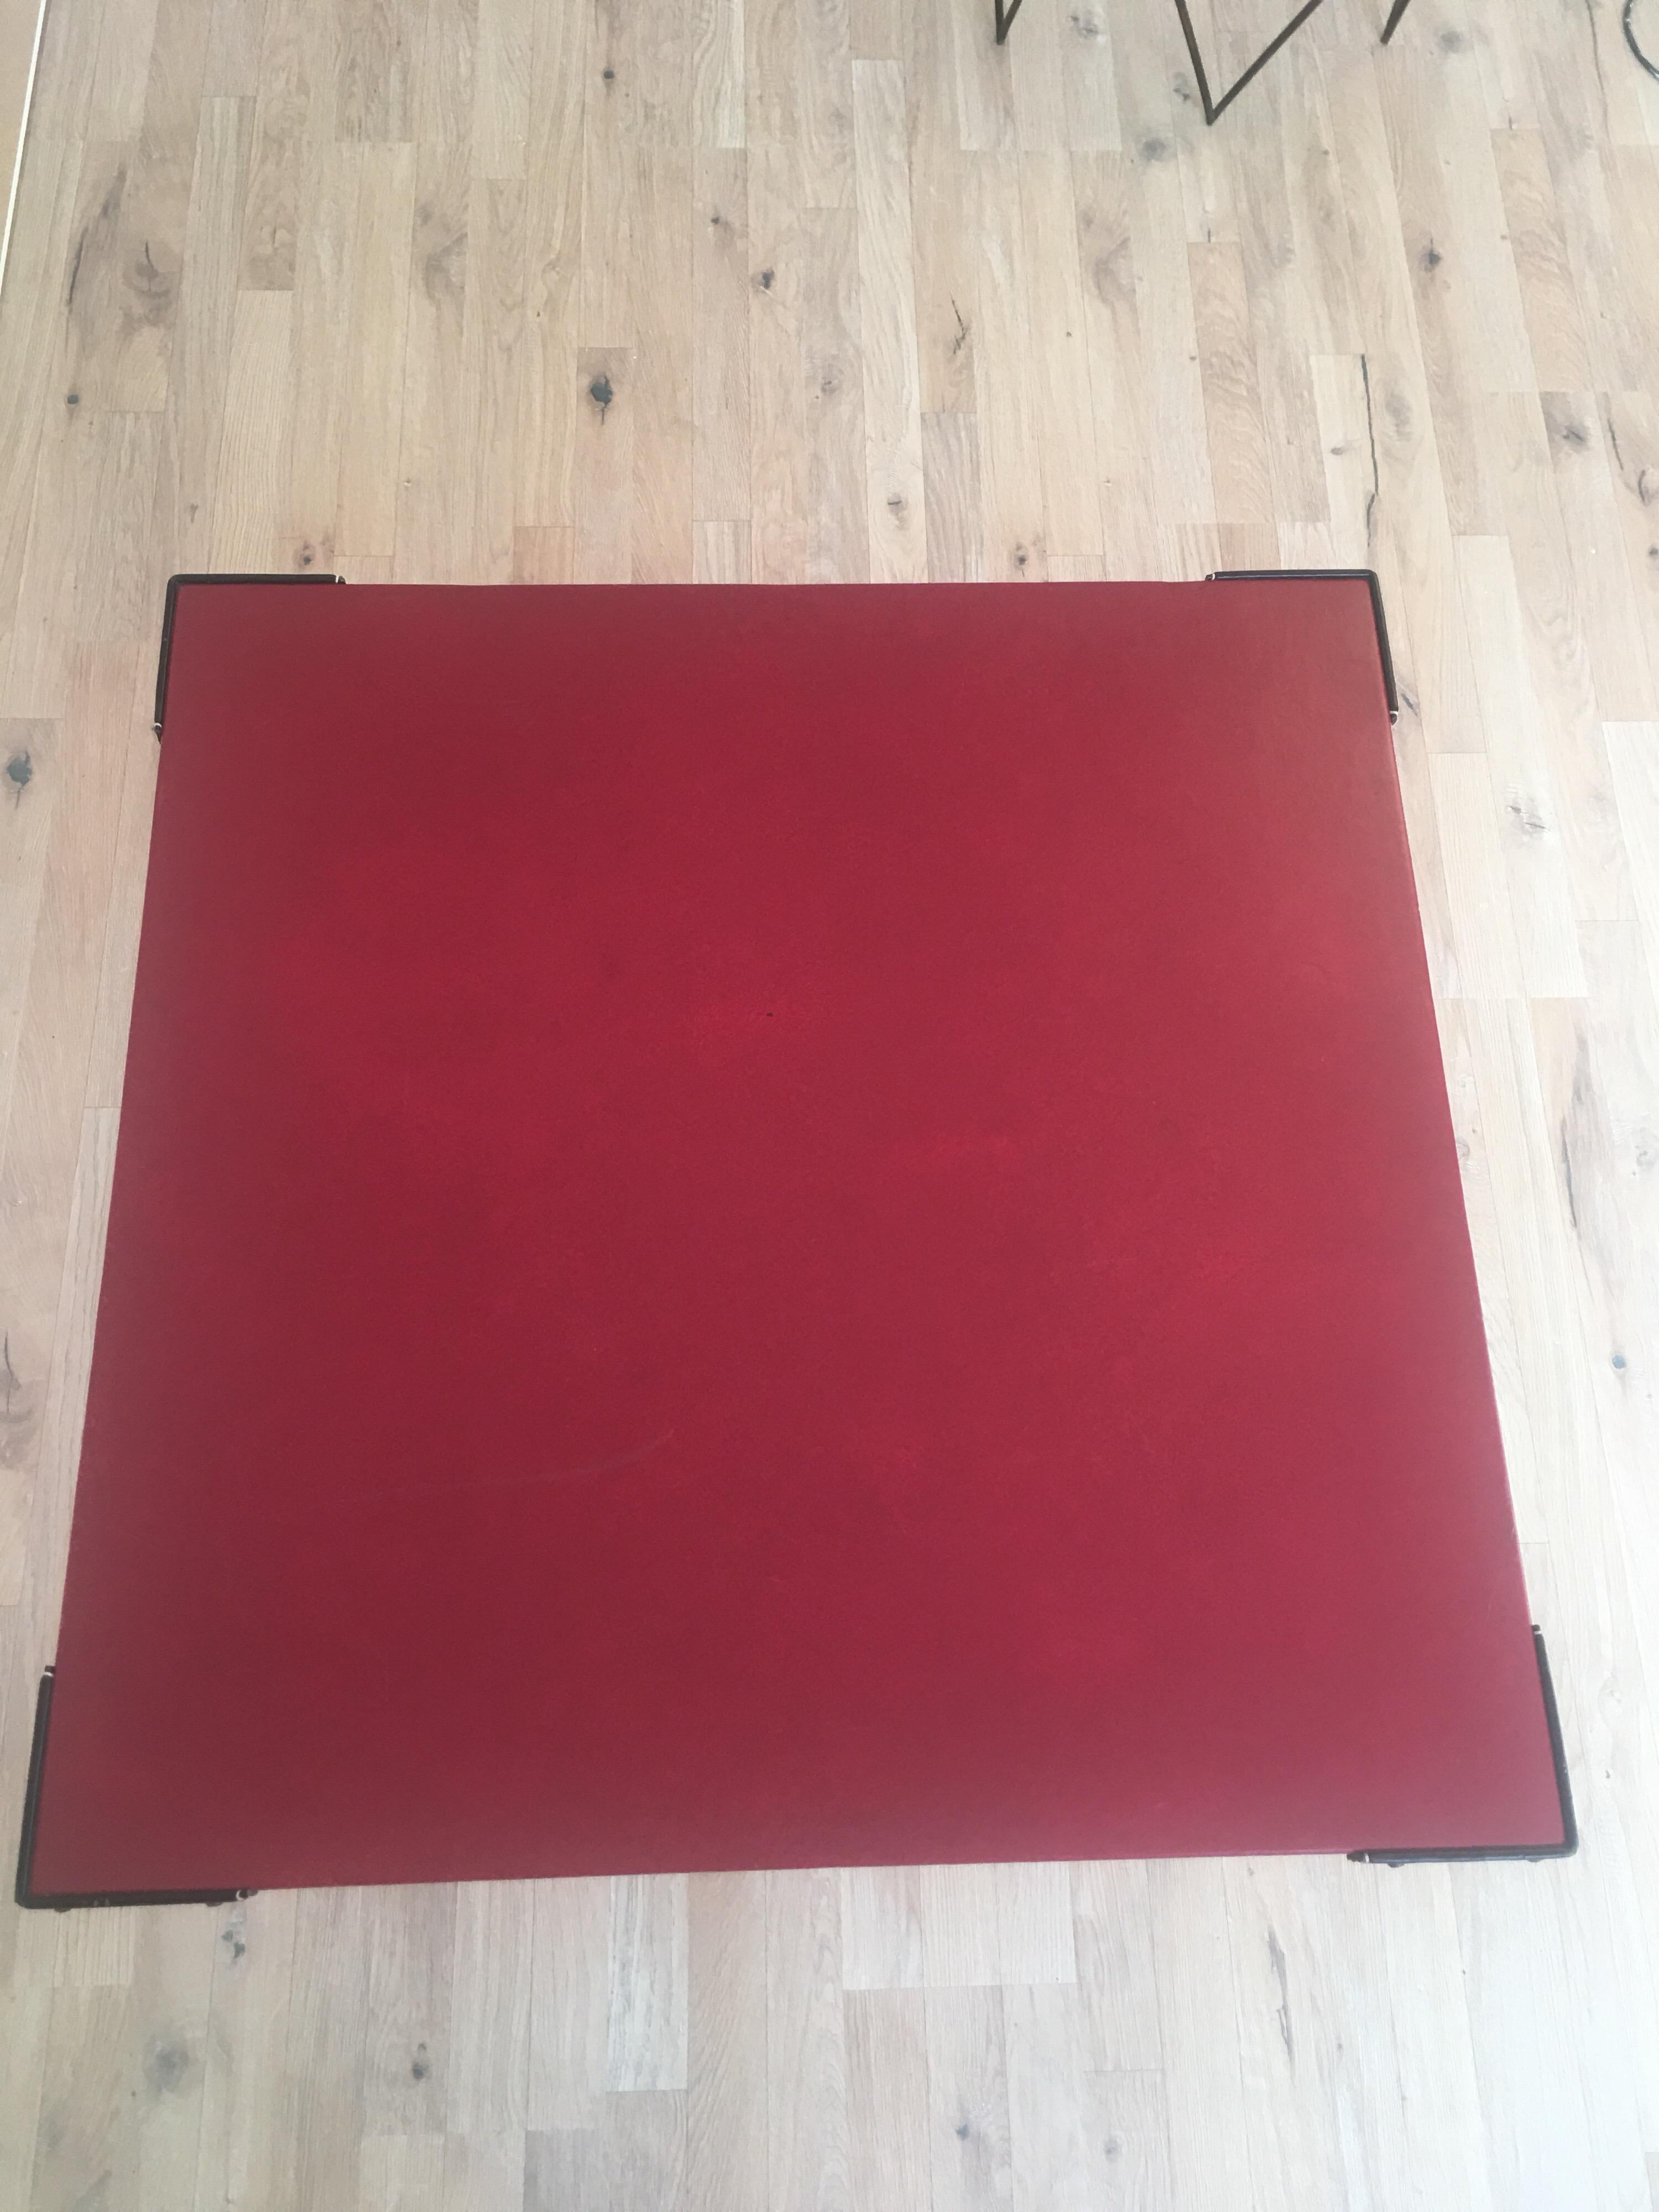 Jacques Adnet Red Leather Top and Black Leather Folding Square Table, 1950s For Sale 3